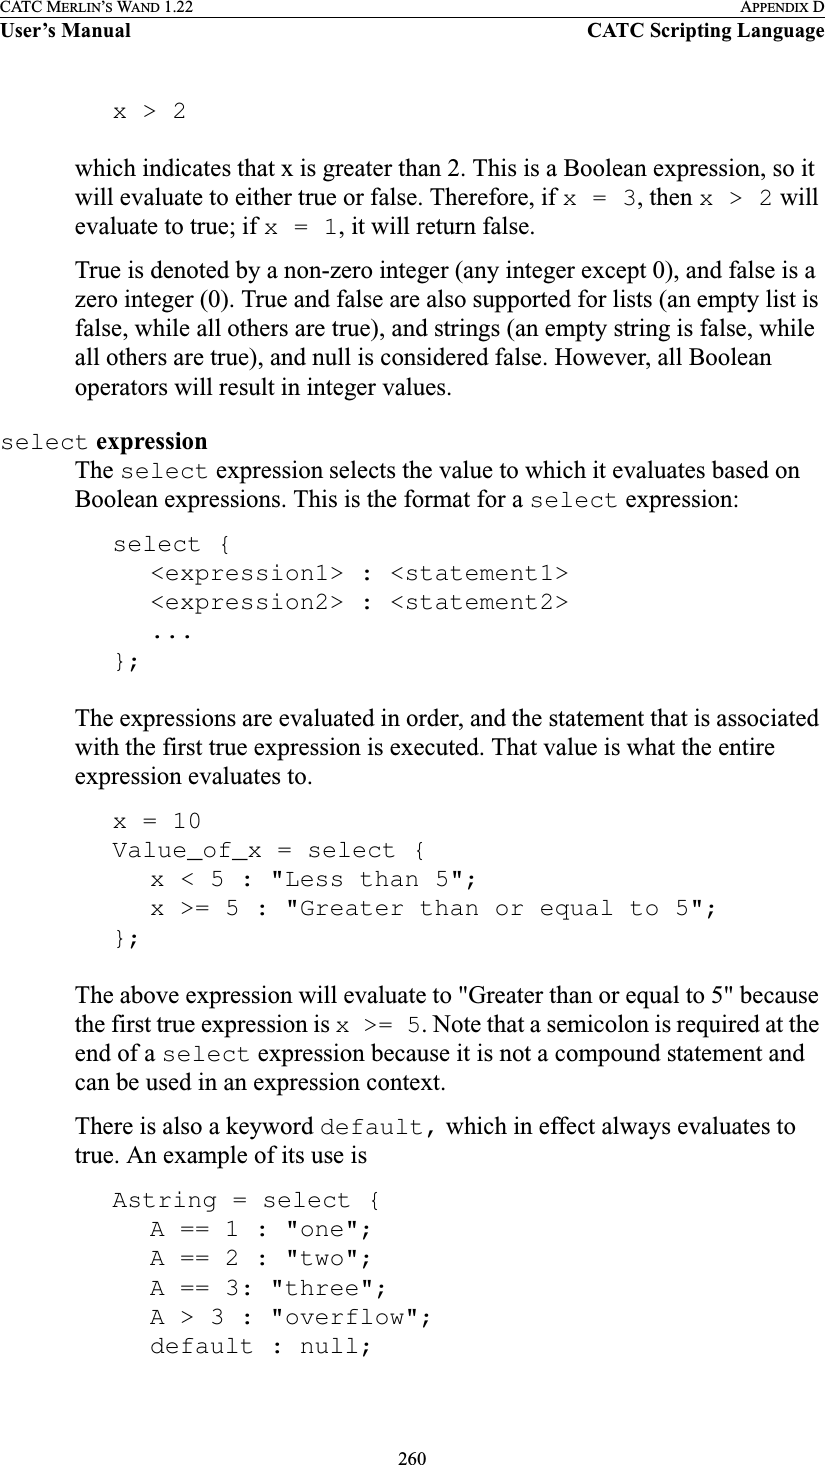 260CATC MERLIN’S WAND 1.22 APPENDIX DUser’s Manual CATC Scripting Languagex &gt; 2which indicates that x is greater than 2. This is a Boolean expression, so it will evaluate to either true or false. Therefore, if x = 3, then x &gt; 2 will evaluate to true; if x = 1, it will return false.True is denoted by a non-zero integer (any integer except 0), and false is a zero integer (0). True and false are also supported for lists (an empty list is false, while all others are true), and strings (an empty string is false, while all others are true), and null is considered false. However, all Boolean operators will result in integer values.select expressionThe select expression selects the value to which it evaluates based on Boolean expressions. This is the format for a select expression:select {&lt;expression1&gt; : &lt;statement1&gt;&lt;expression2&gt; : &lt;statement2&gt;...};The expressions are evaluated in order, and the statement that is associated with the first true expression is executed. That value is what the entire expression evaluates to. x = 10Value_of_x = select {x &lt; 5 : &quot;Less than 5&quot;;x &gt;= 5 : &quot;Greater than or equal to 5&quot;;};The above expression will evaluate to &quot;Greater than or equal to 5&quot; because the first true expression is x &gt;= 5. Note that a semicolon is required at the end of a select expression because it is not a compound statement and can be used in an expression context.There is also a keyword default, which in effect always evaluates to true. An example of its use isAstring = select {A == 1 : &quot;one&quot;;A == 2 : &quot;two&quot;;A == 3: &quot;three&quot;;A &gt; 3 : &quot;overflow&quot;;default : null;